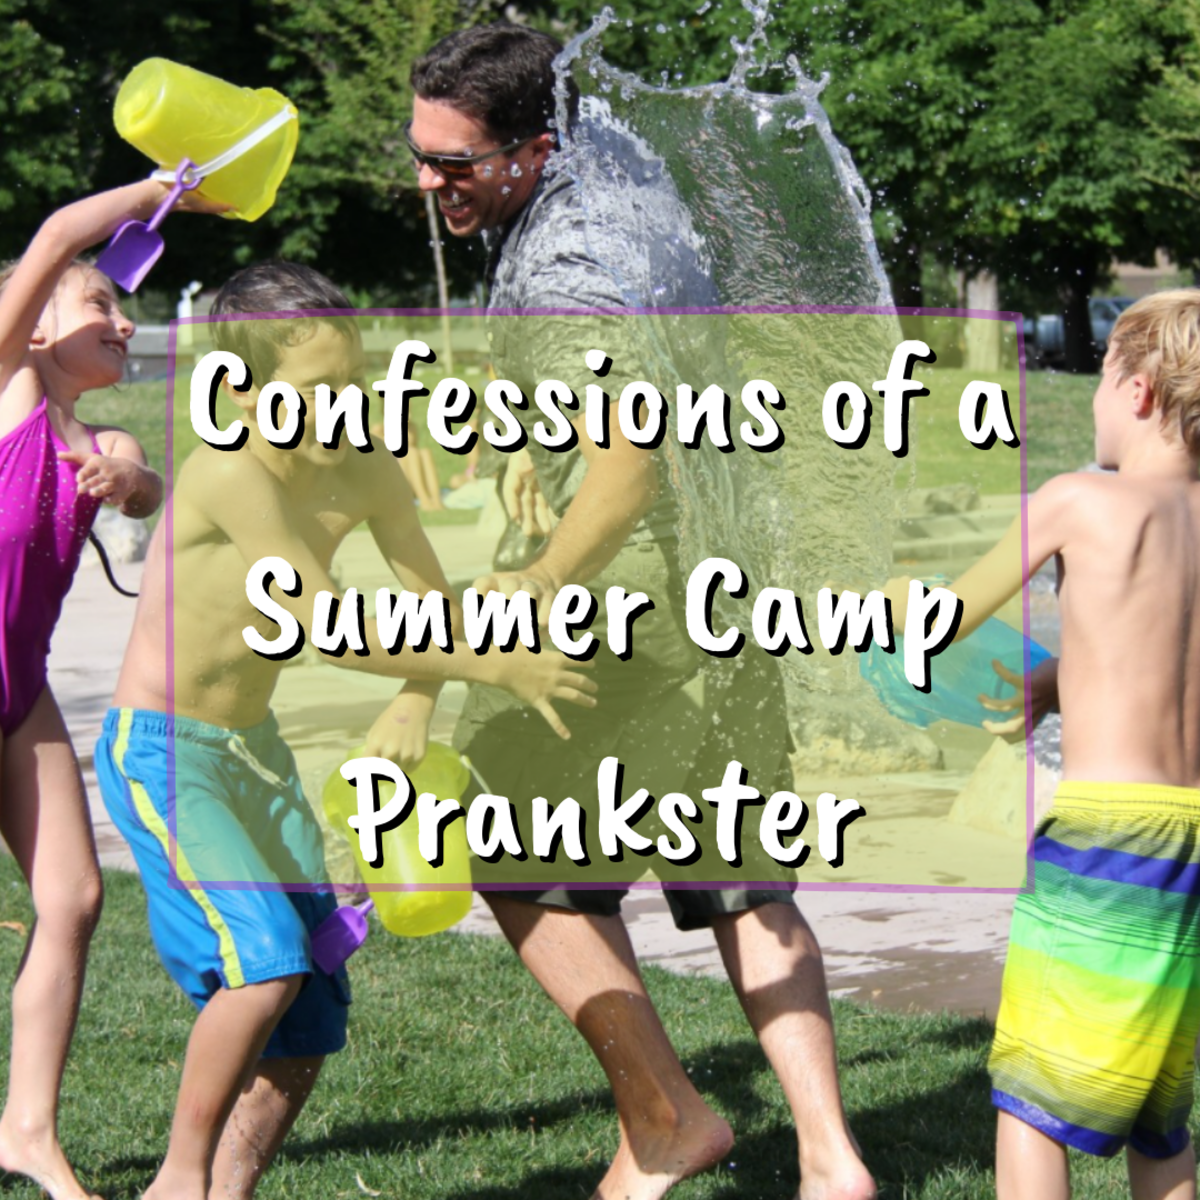 Read on to learn about 7 great summer camp pranks.